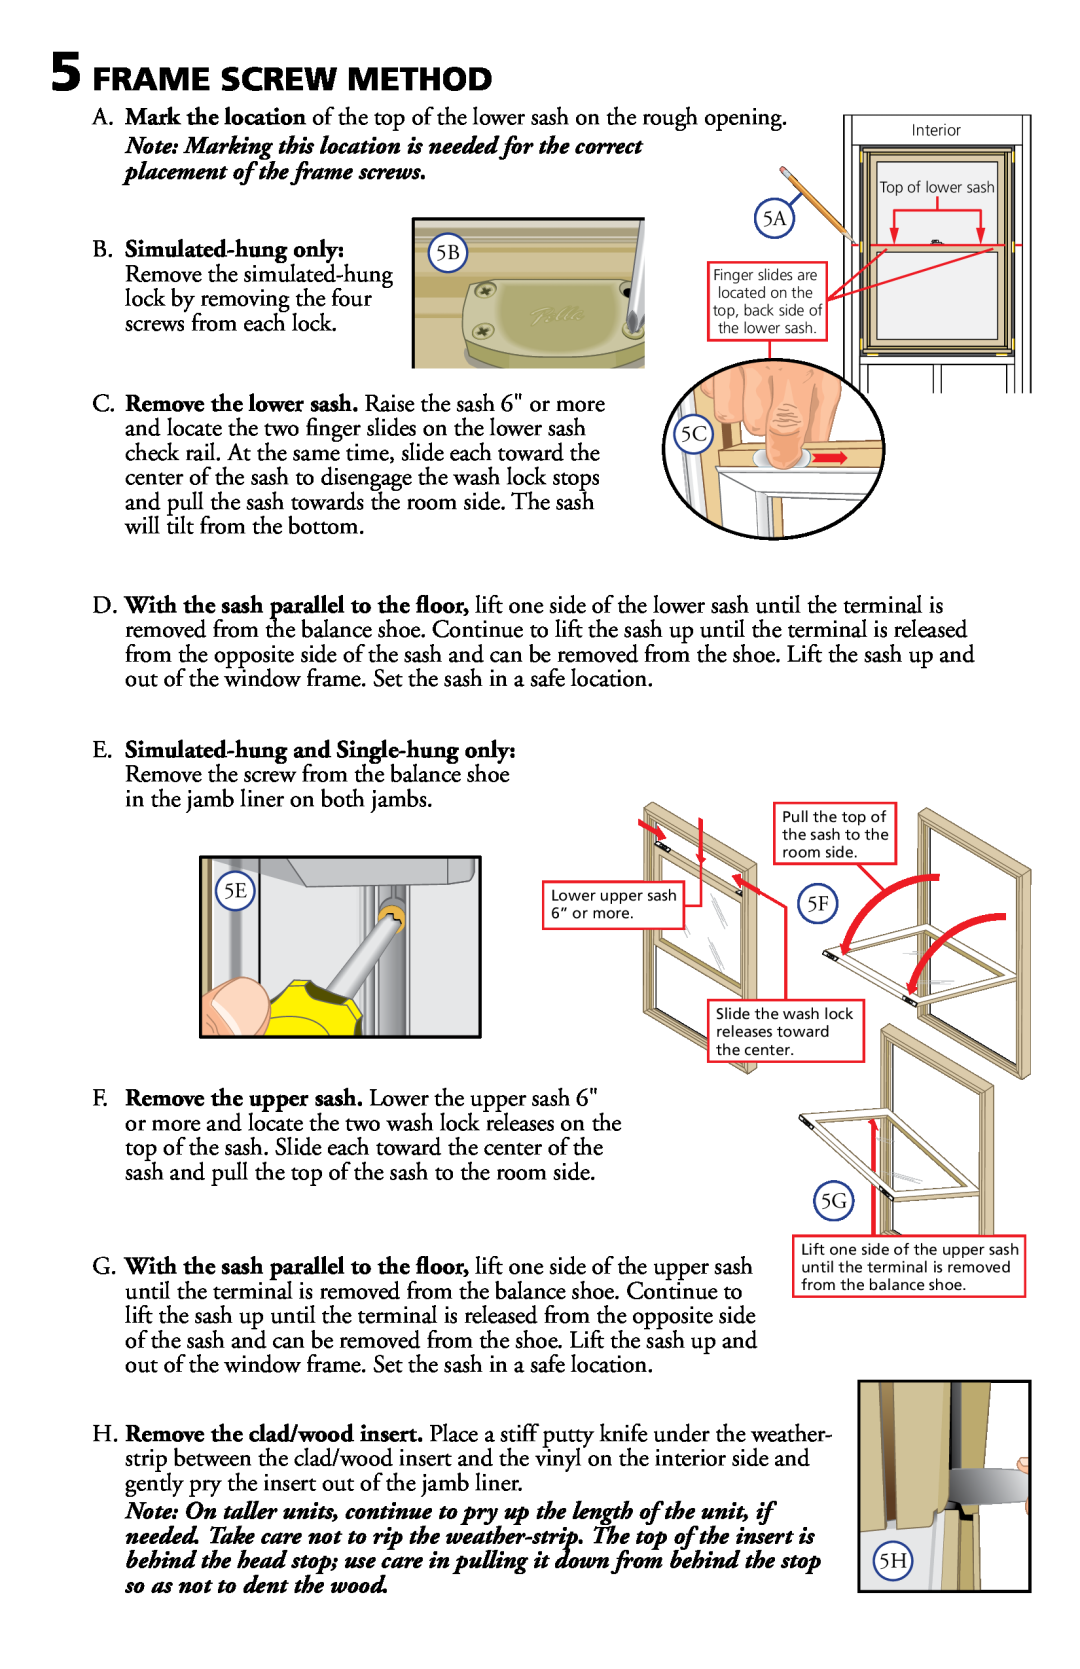 Pella 80ED0101 installation instructions Frame Screw Method, B. Simulated-hung only 